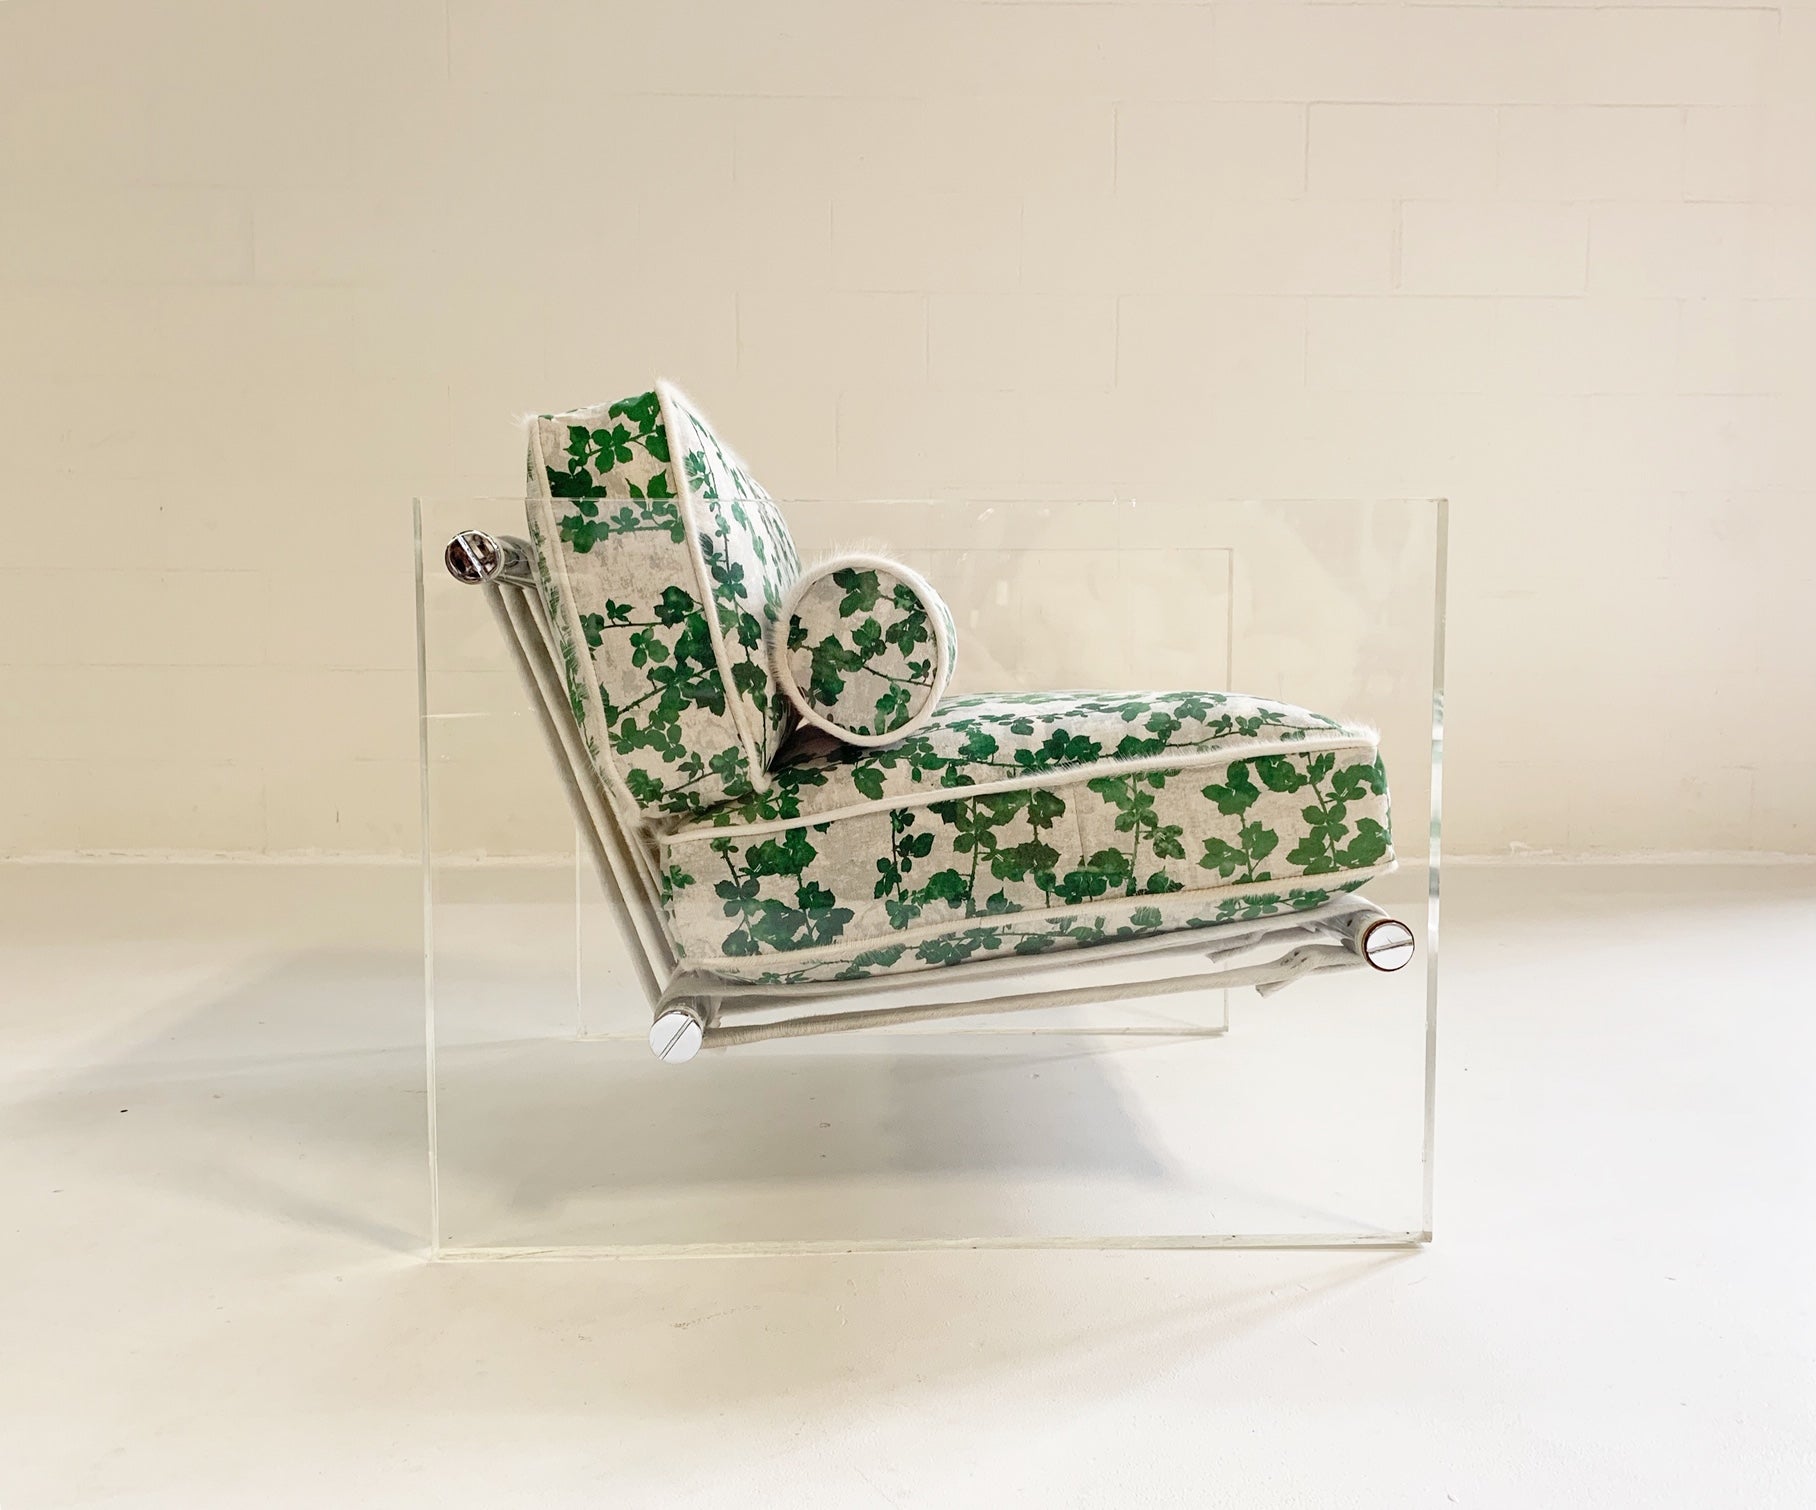 Lucite Slab Lounge Chair in "Brambles" - FORSYTH